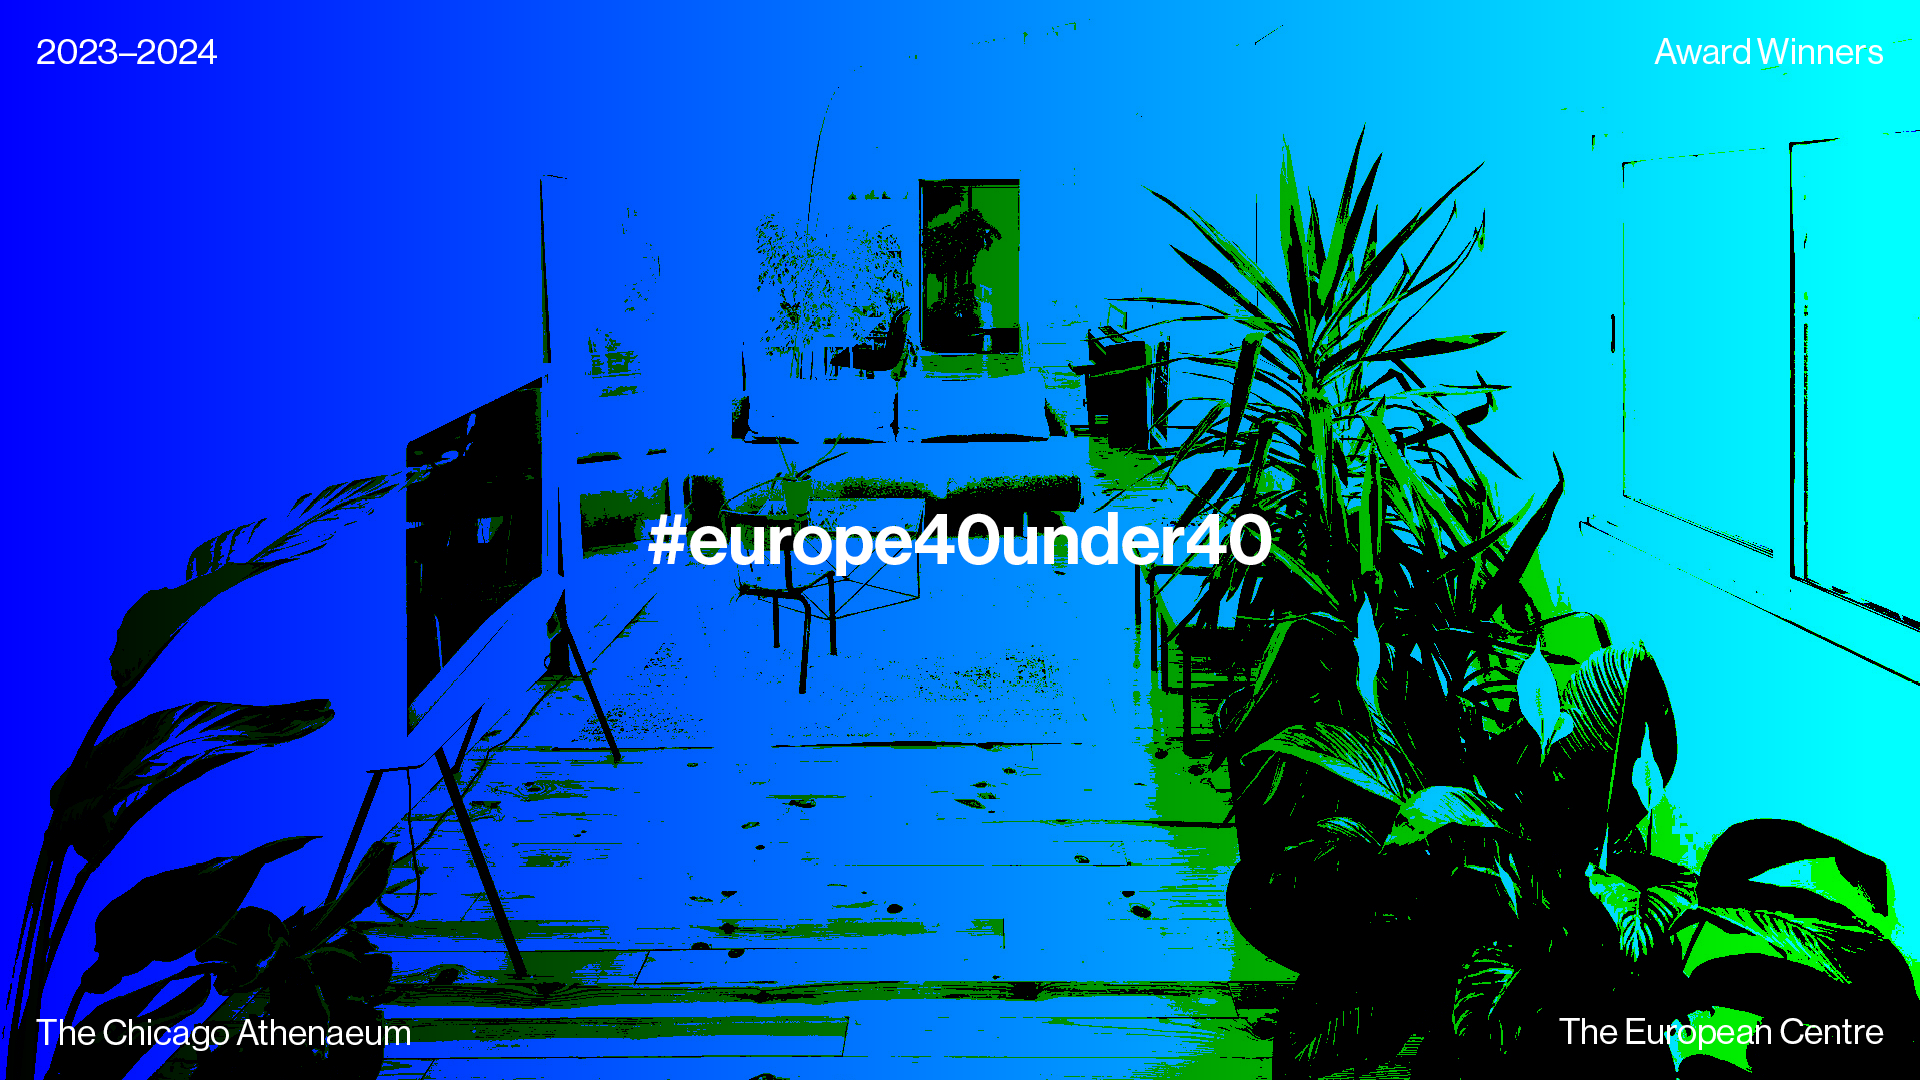 The winners of the “Europe 40under40” award 2023-2024